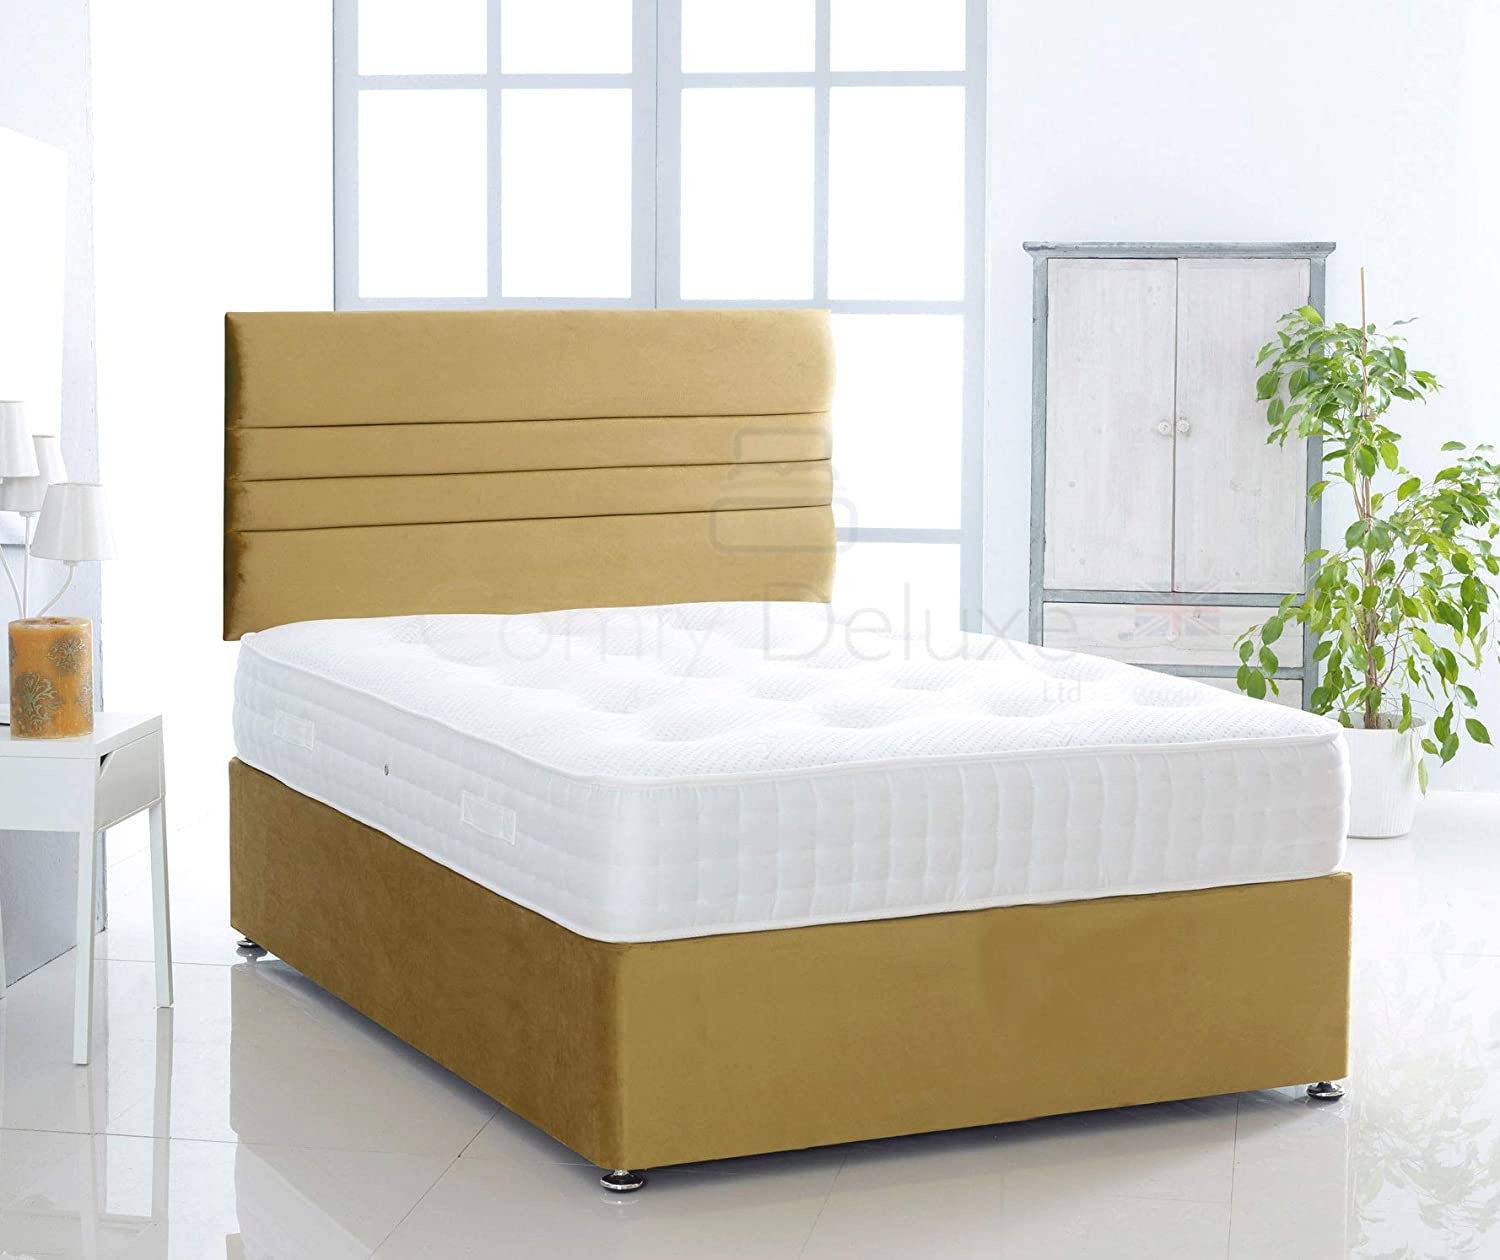 Yellow-Verona-Plush-Pocket-Divan-Bed-Set-Lined-Headboard-Storage-Drawers-Faux-Leather-Chenille-Soft-Velvet-Lined-Headboard-Pocket-Mattress-Soft-Firm-Medium-Firm-Glides